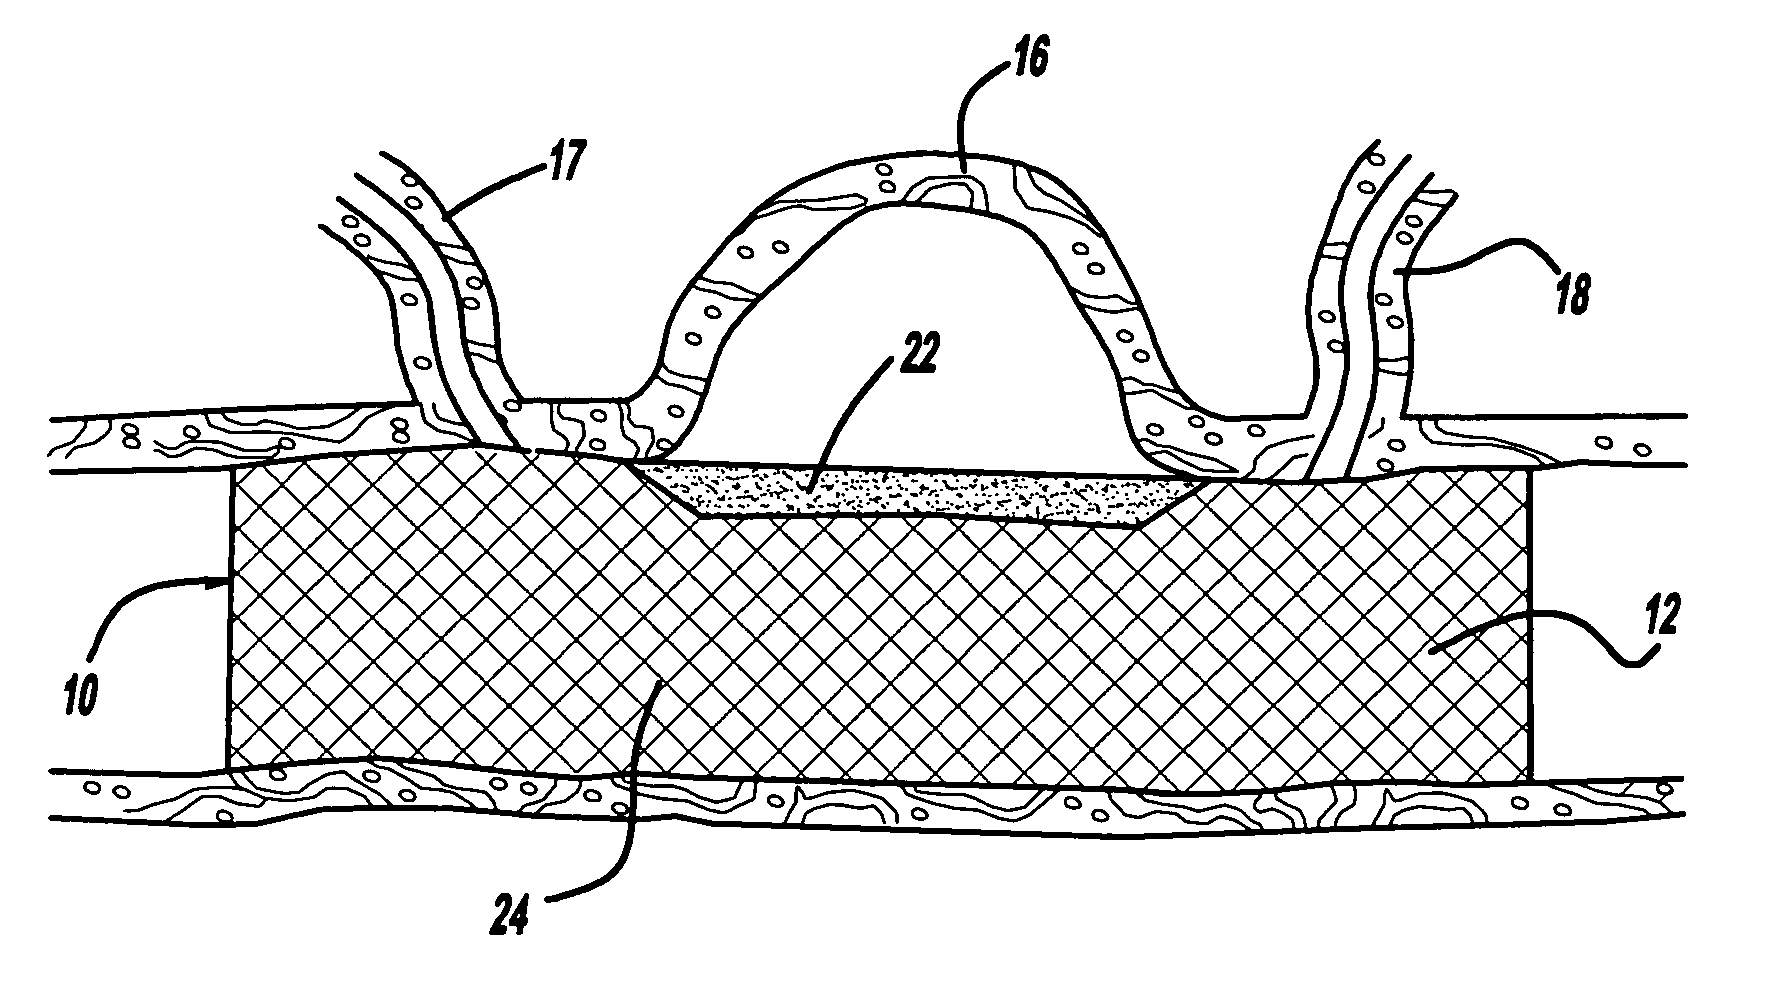 Expandable stent having a stabilized portion